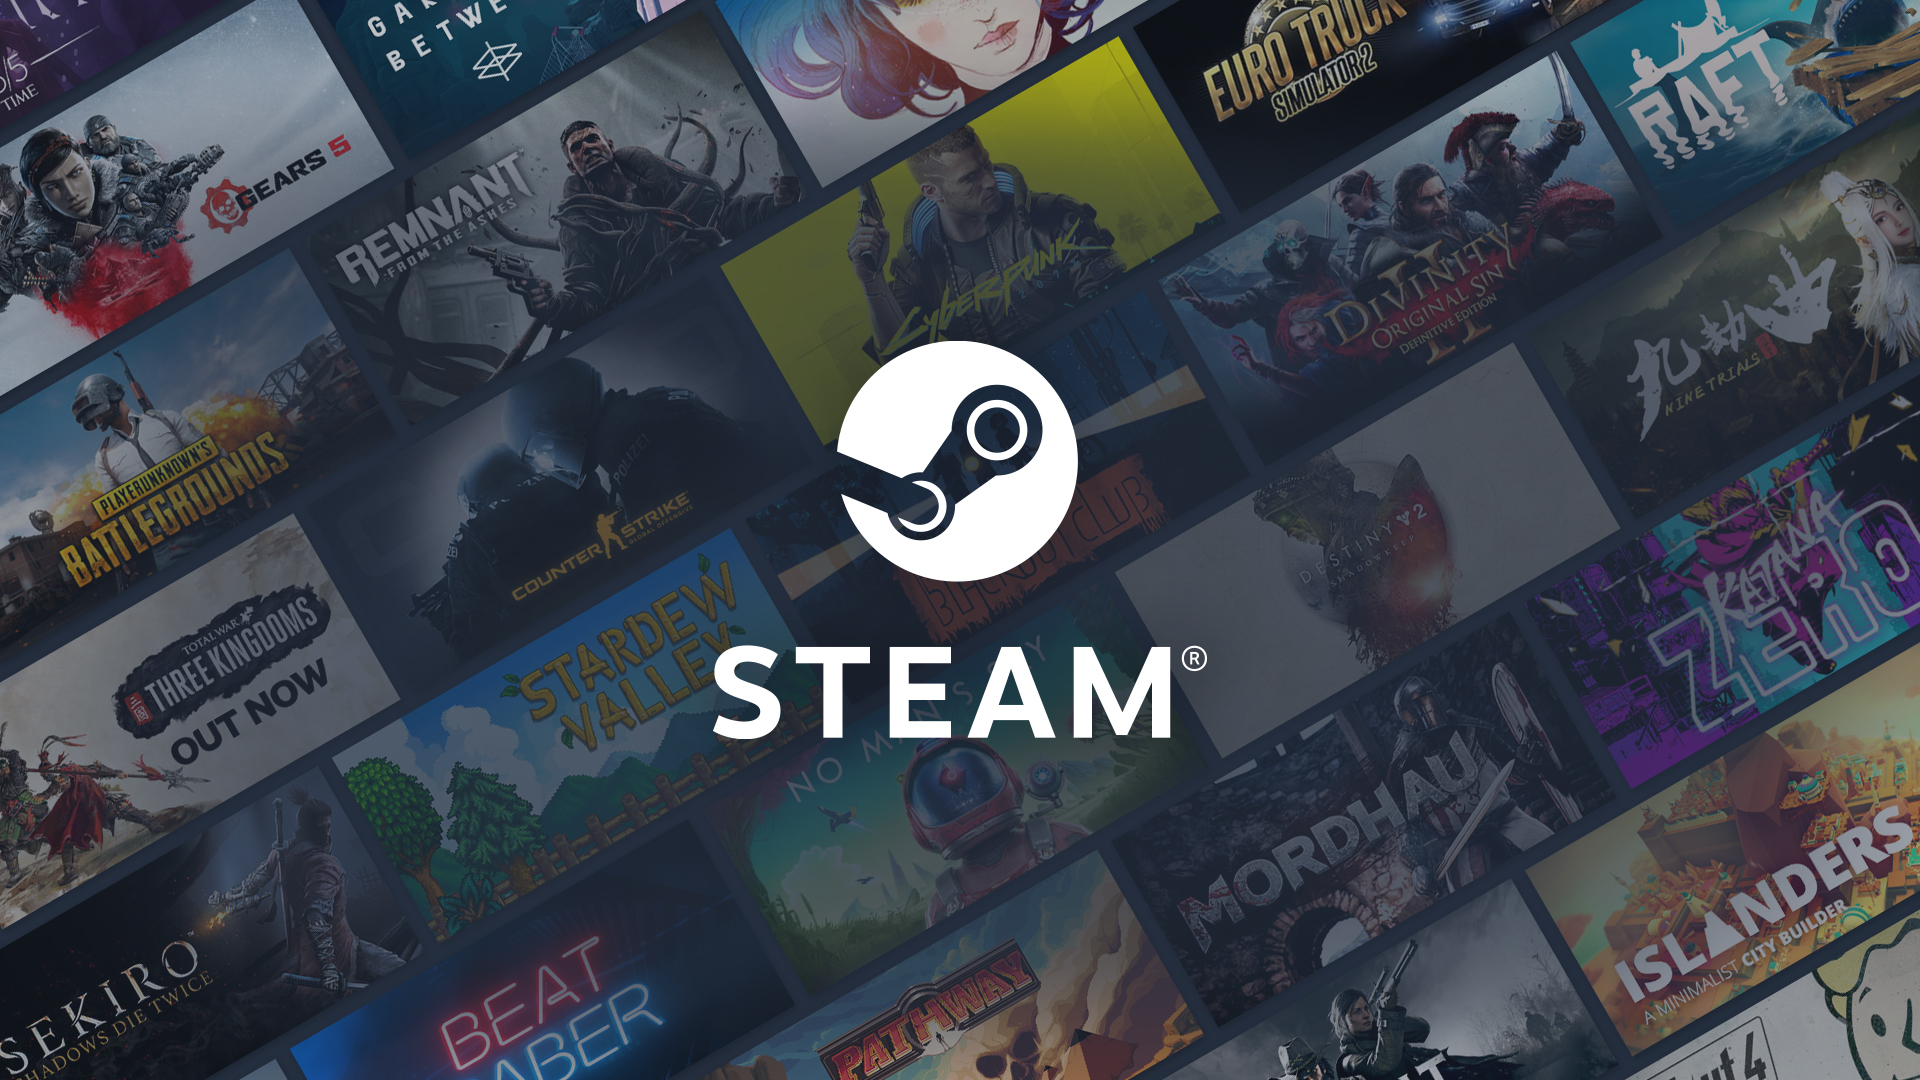 Valve's SteamPal feels like a play at something larger